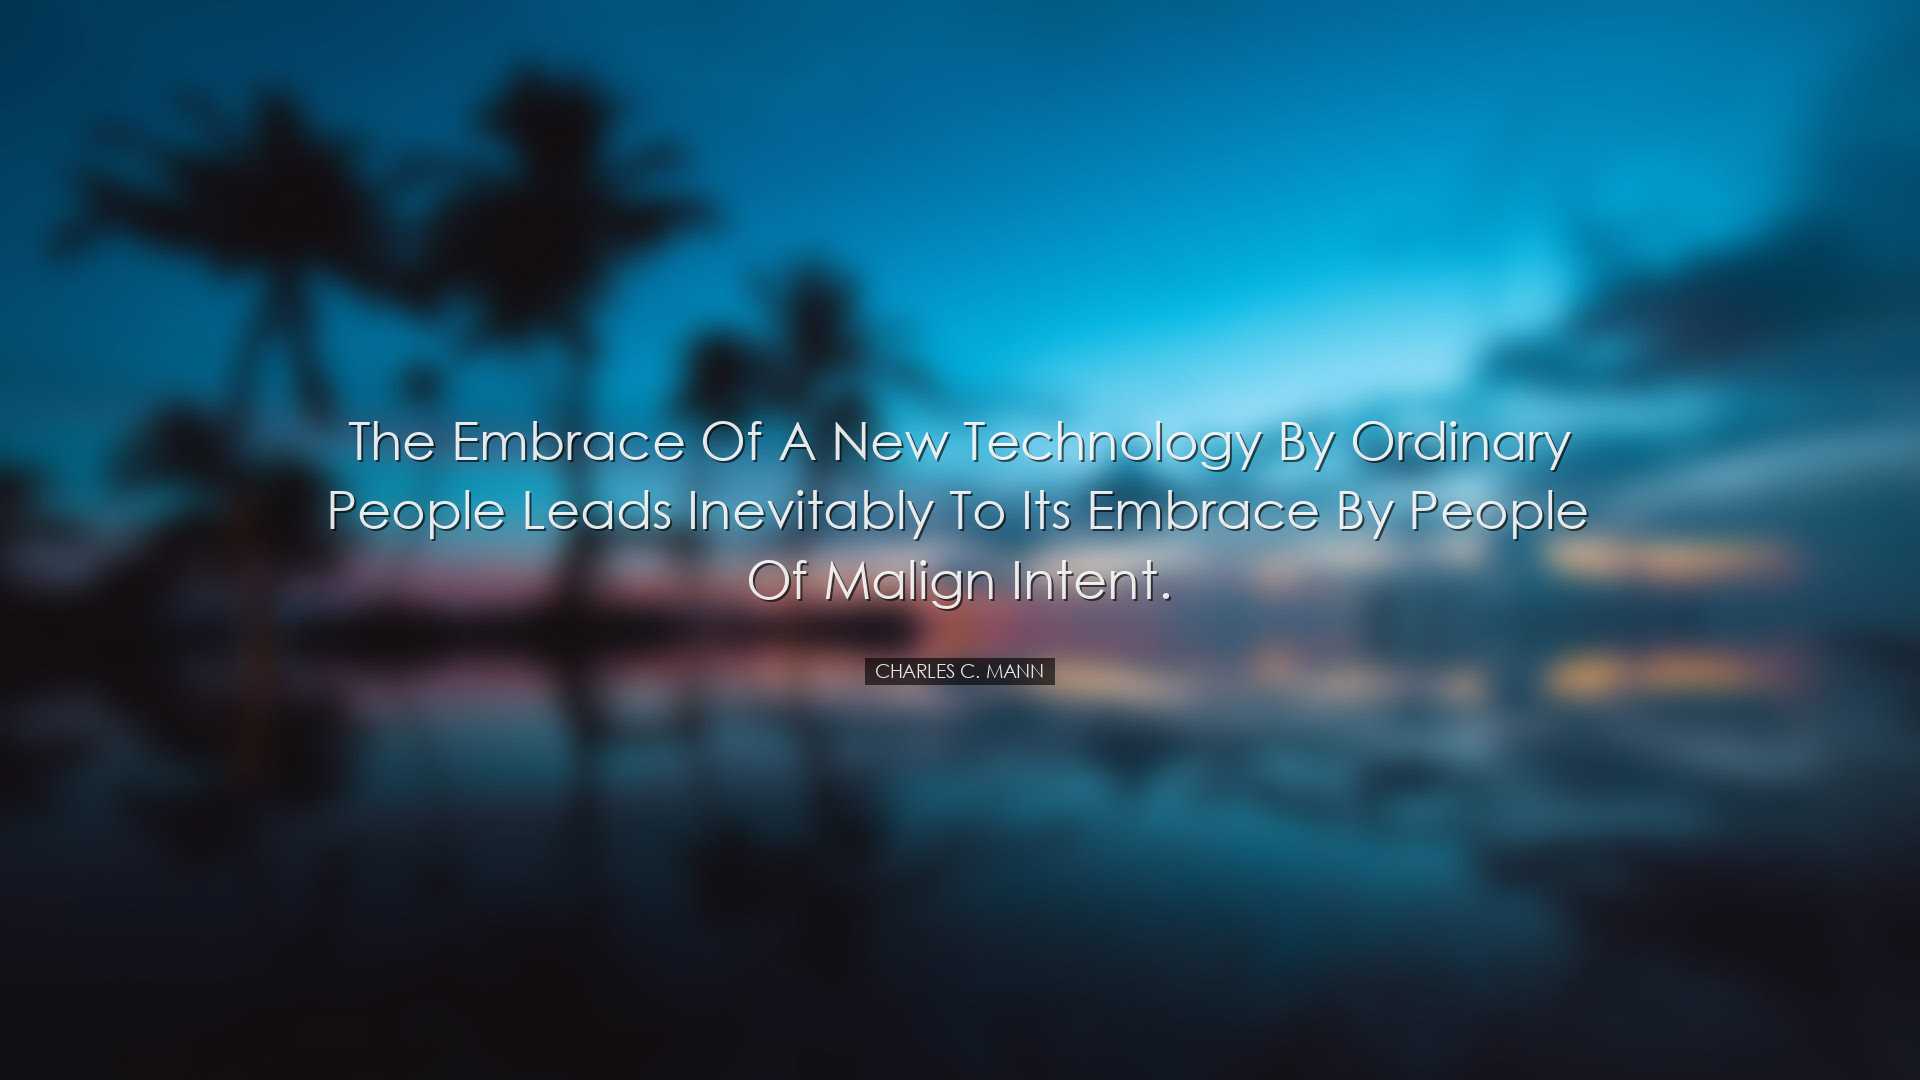 The embrace of a new technology by ordinary people leads inevitabl